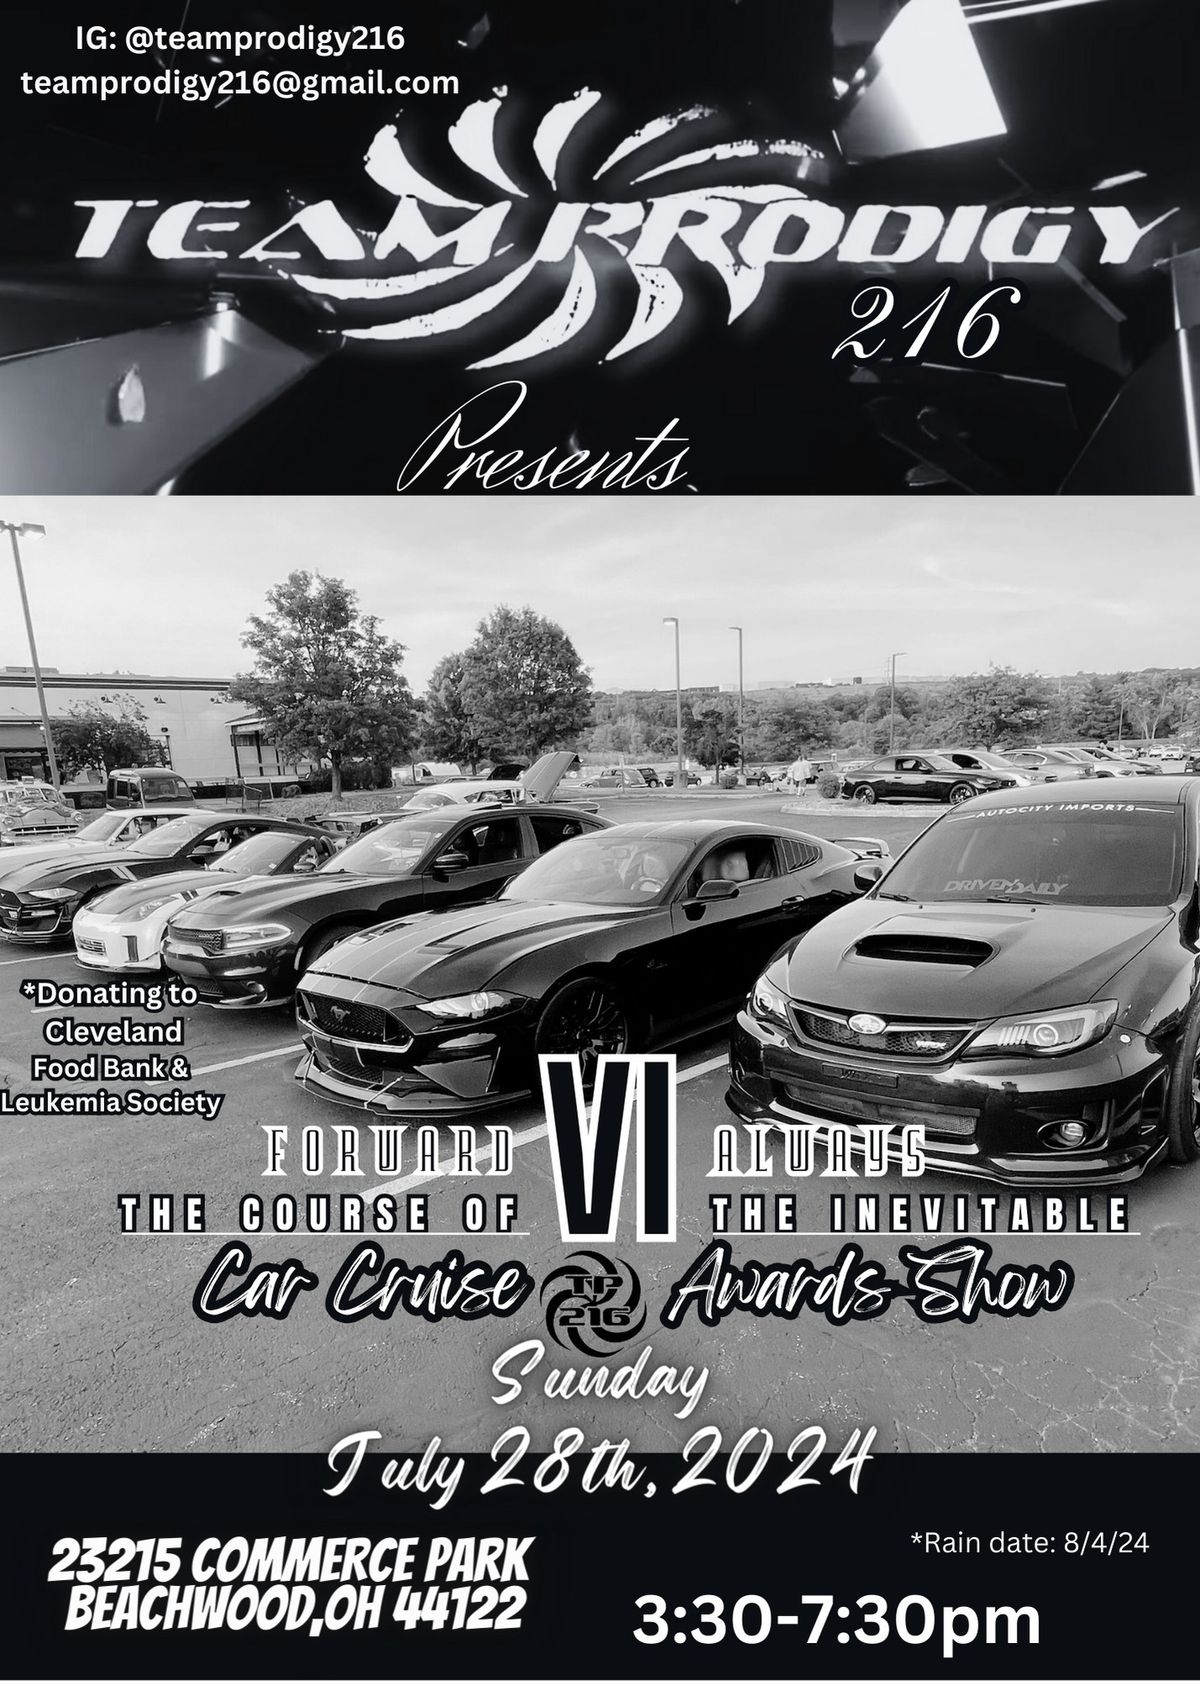 Team Prodigy 216 presents "Forward Always 6: The Course of the Inevitable" Car Cruise & Awards Show 